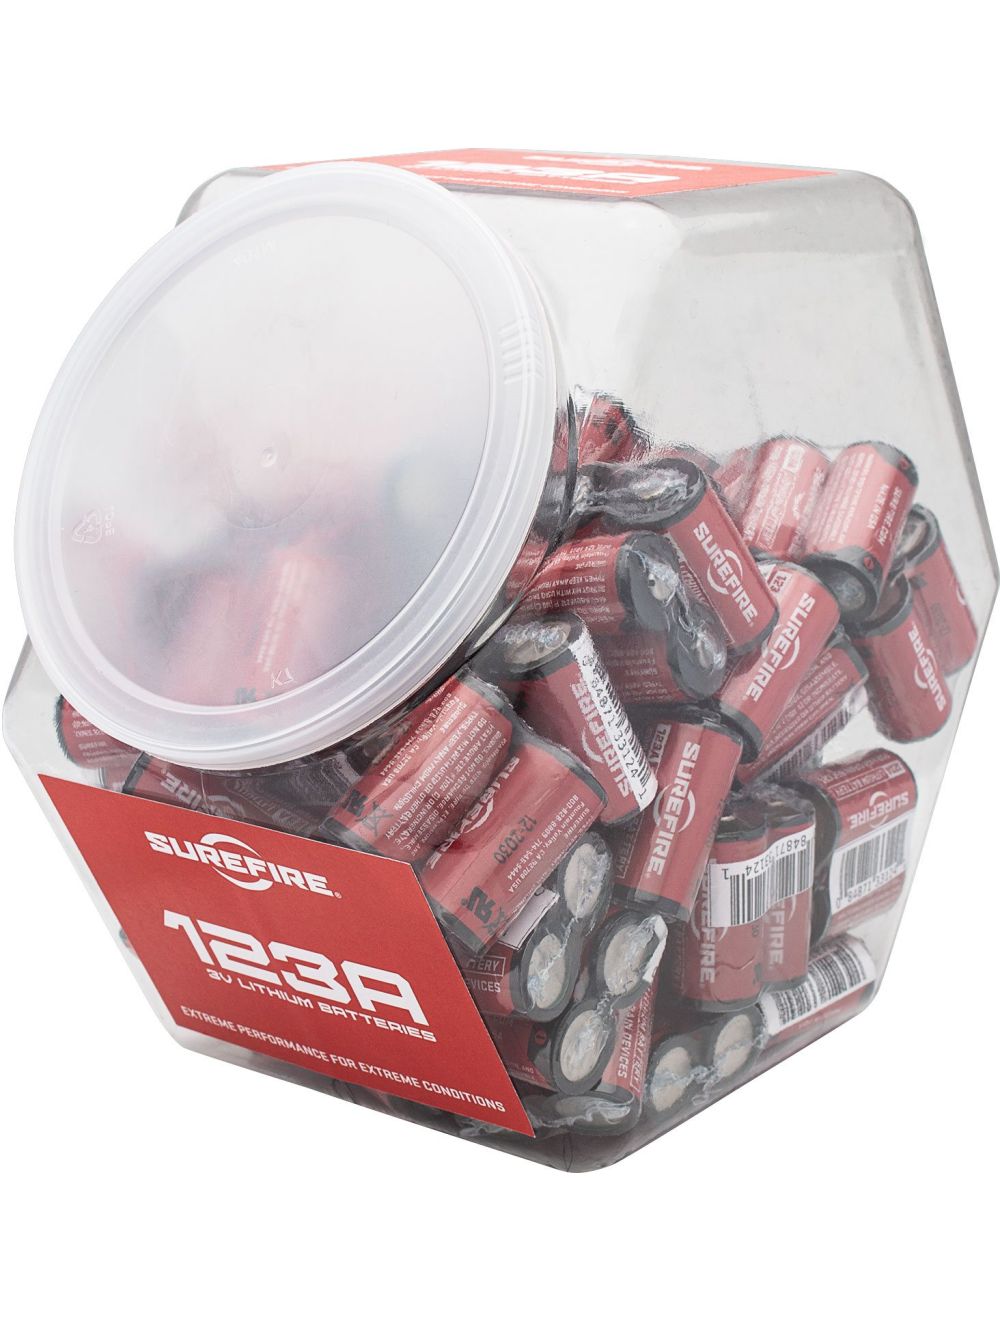 Surefire Shrink-Wrapped 123A Lithium Batteries - 65 Pairs